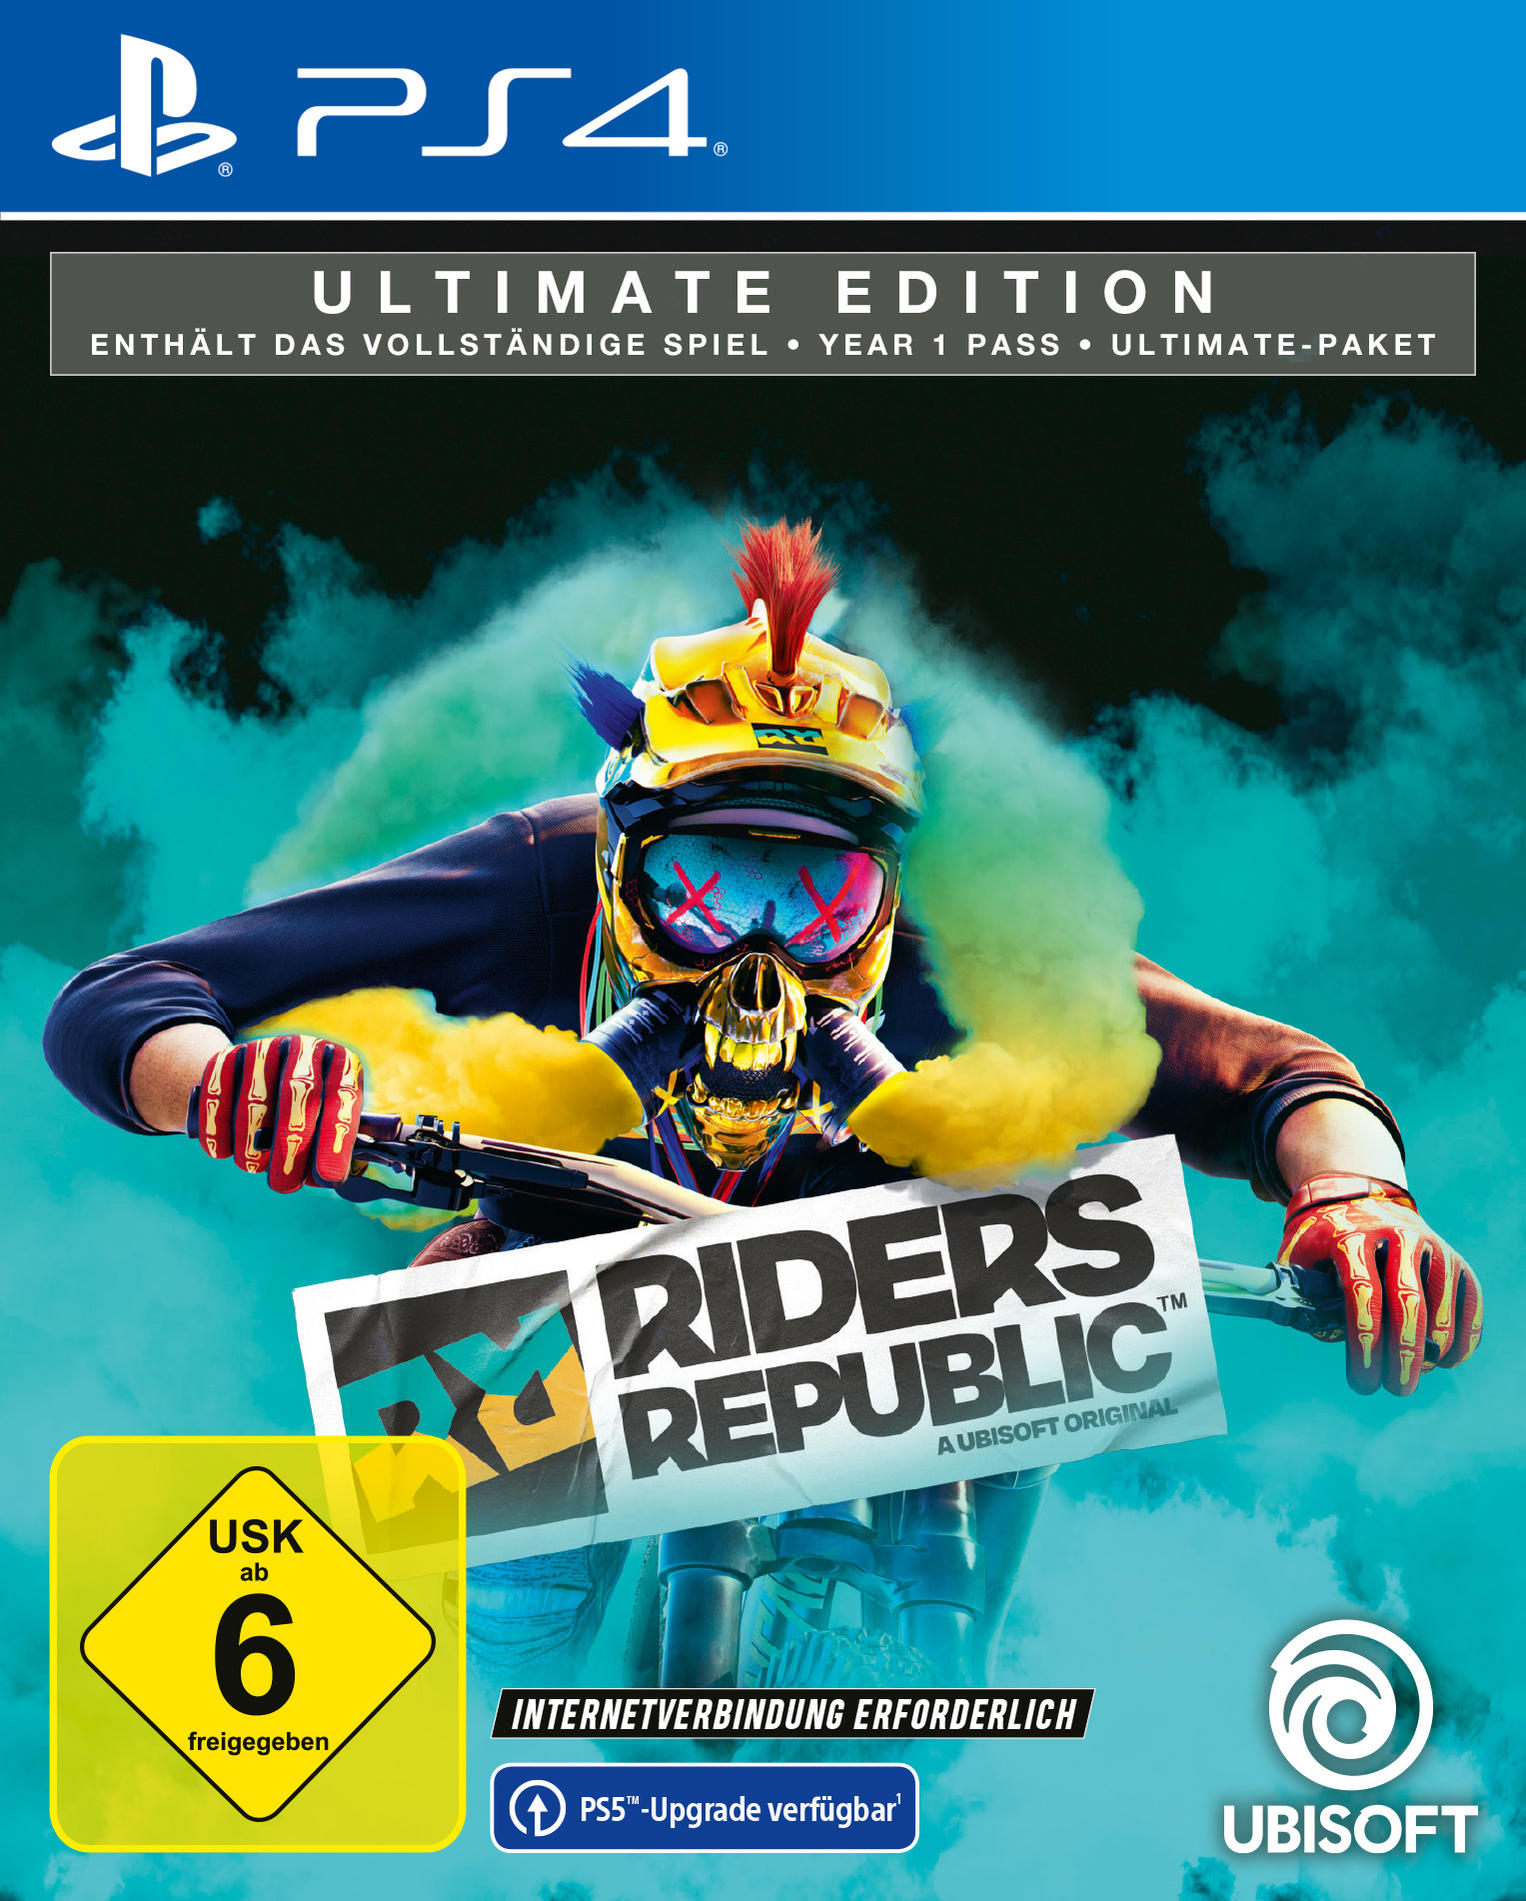 - Republic Ultimate 4] - [PlayStation Riders Edition